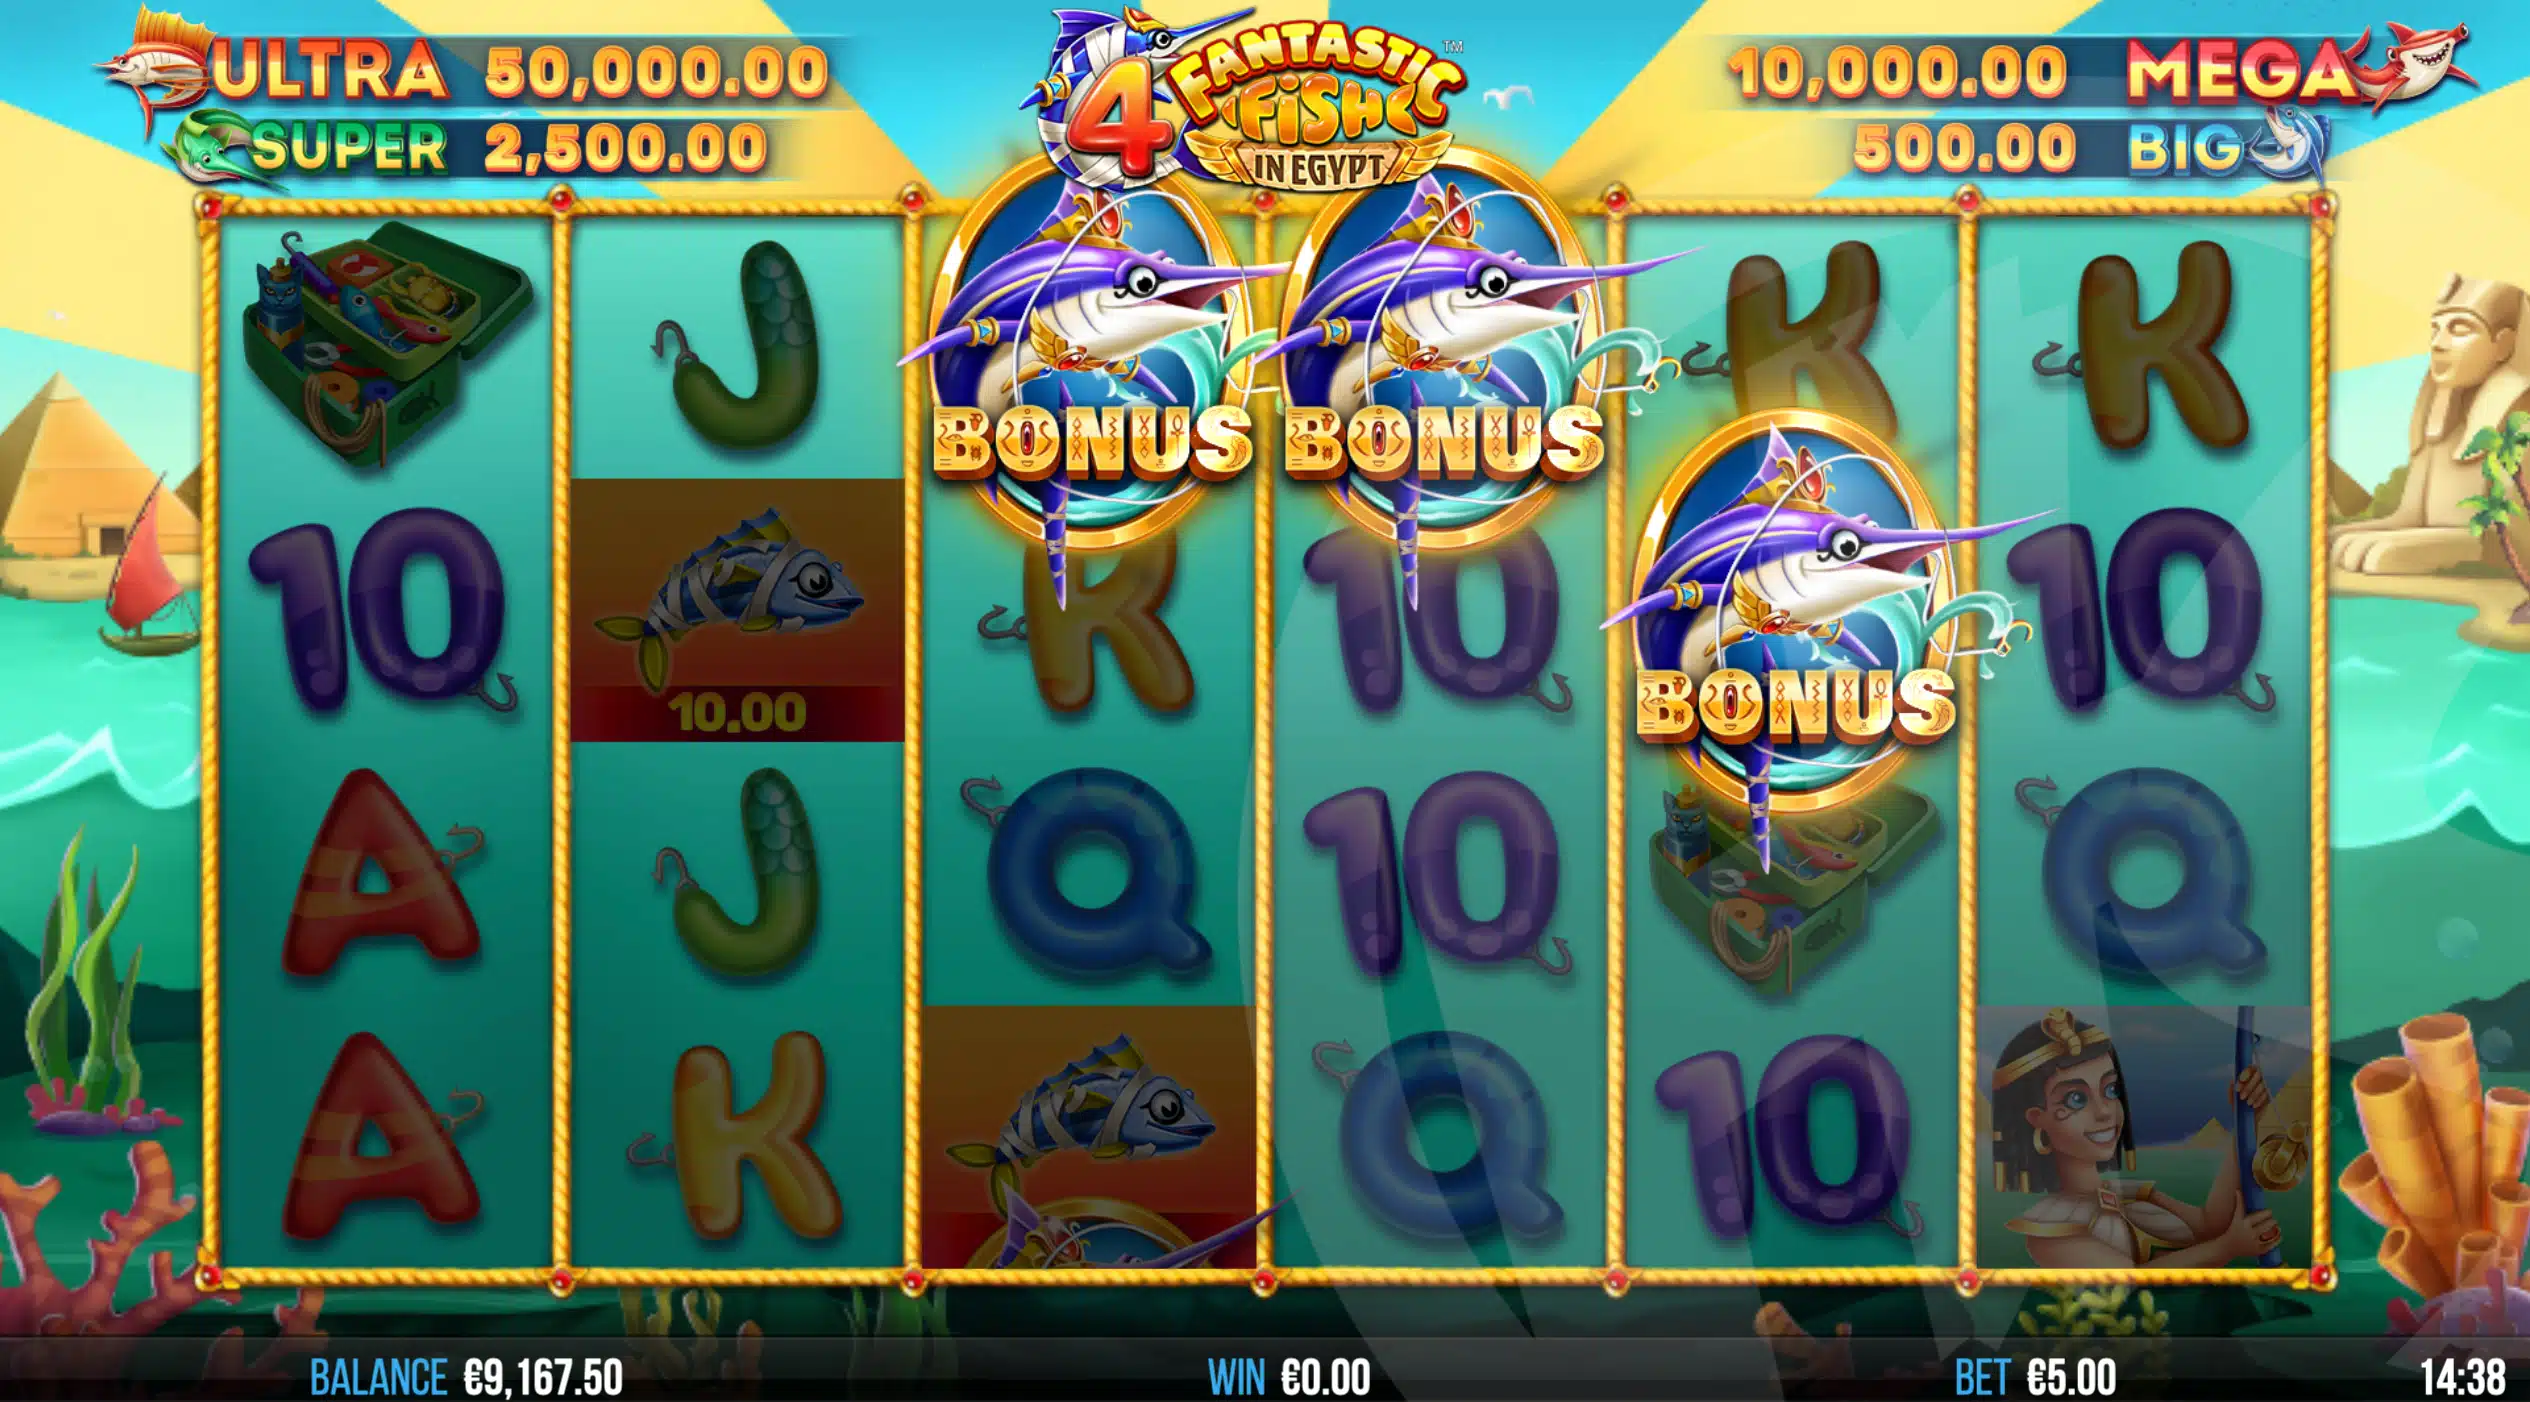 4 Fantastic Fish in Egypt Slot Review & Demo - 4ThePlayer